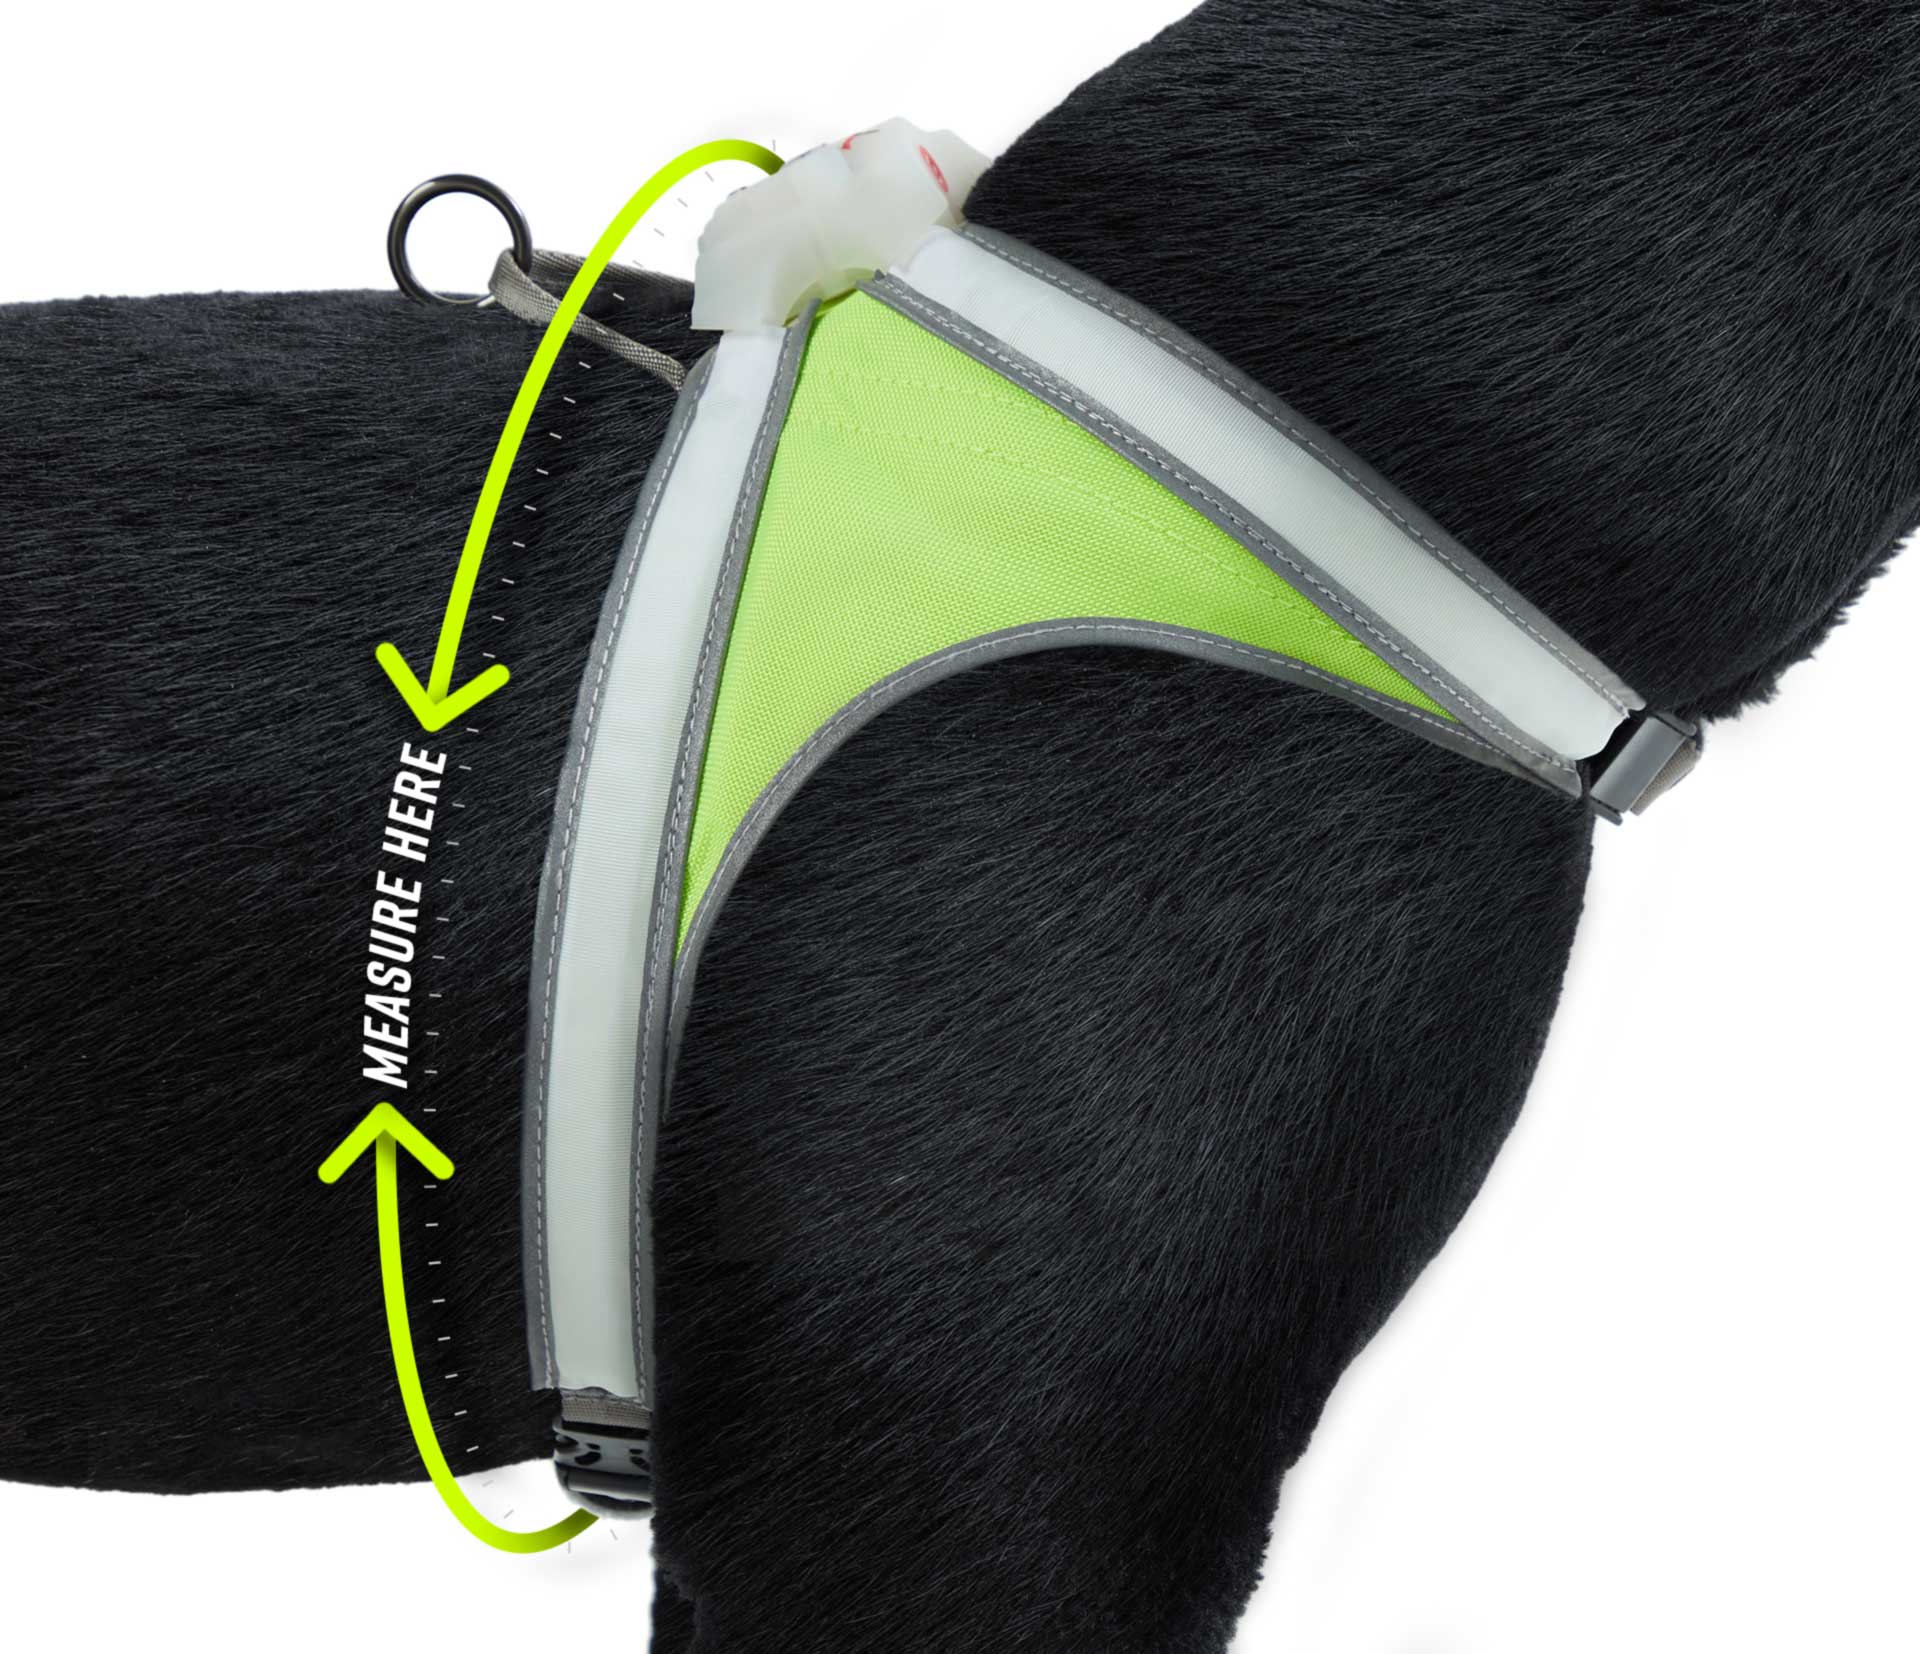 Photo showing the fit of a LightHound around the shoulders of a dog.